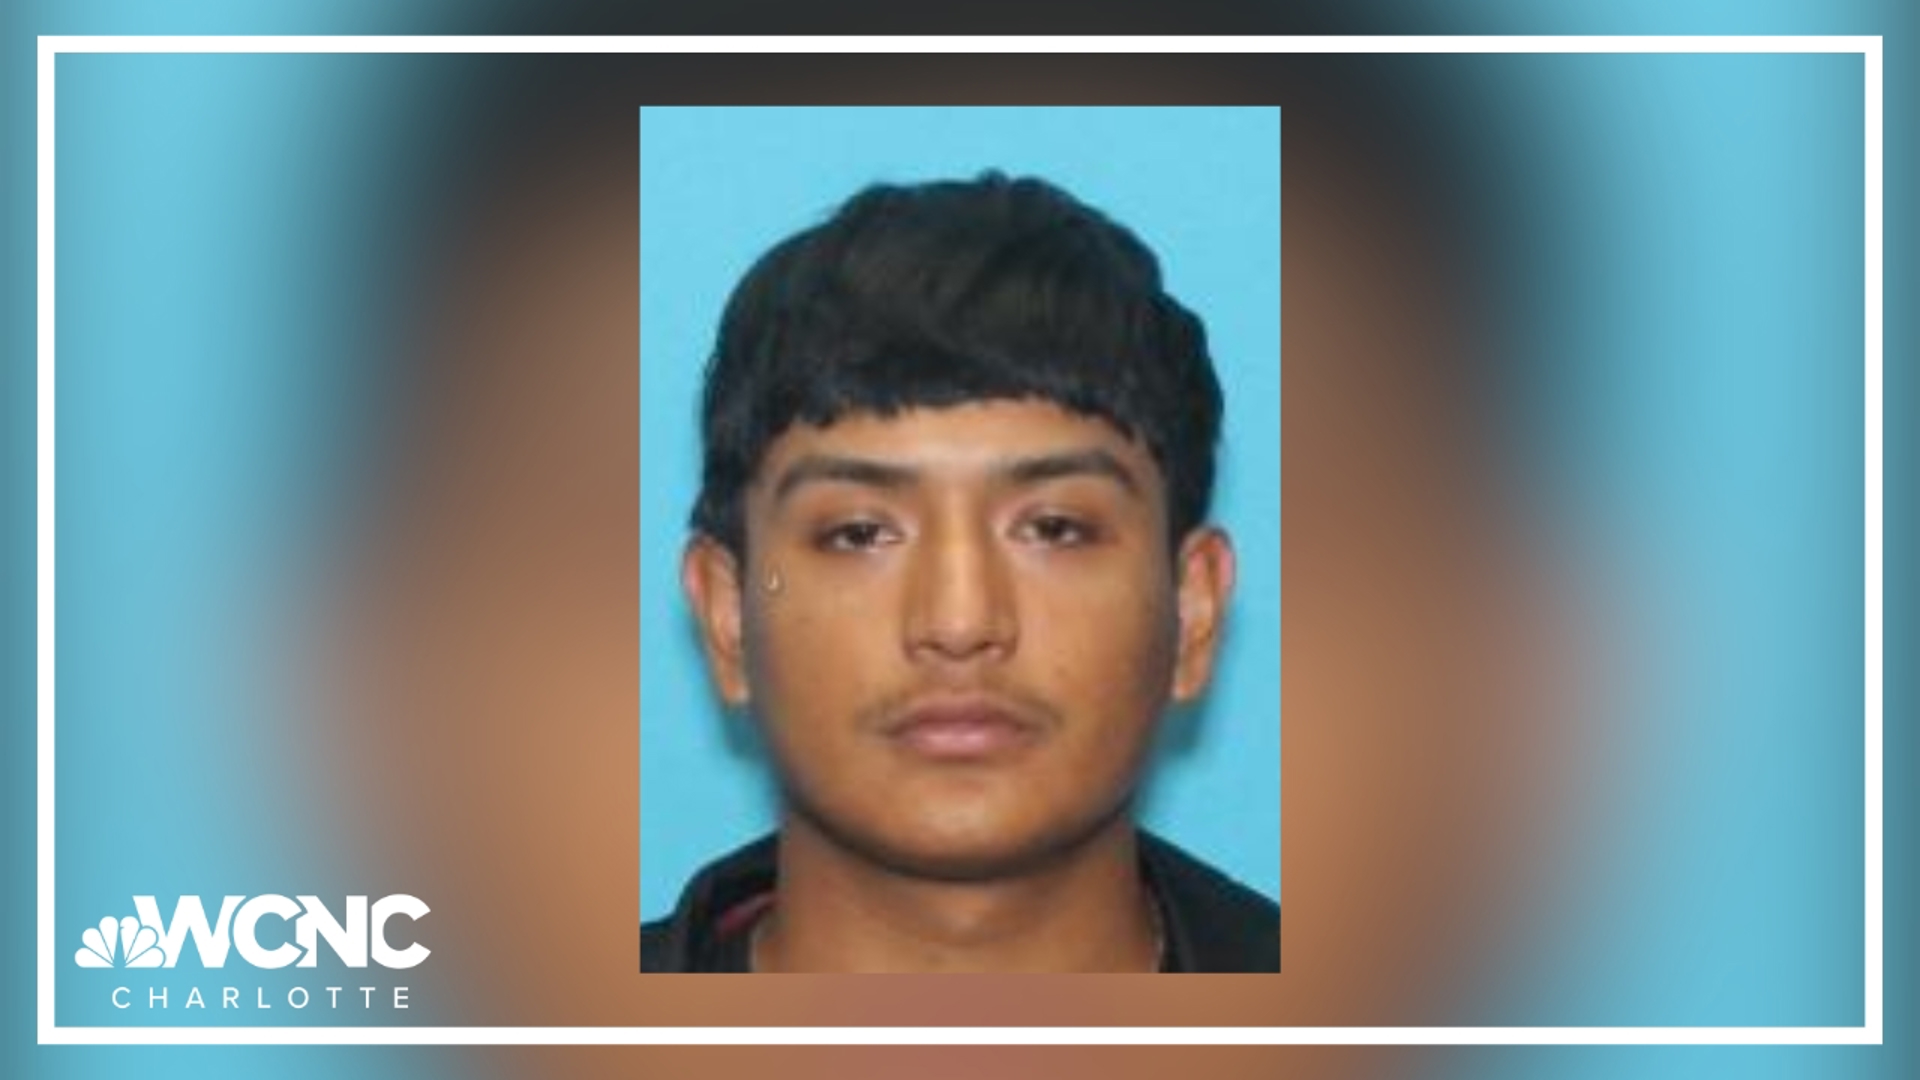 The 19-year-old suspect has been deemed as armed and dangerous.